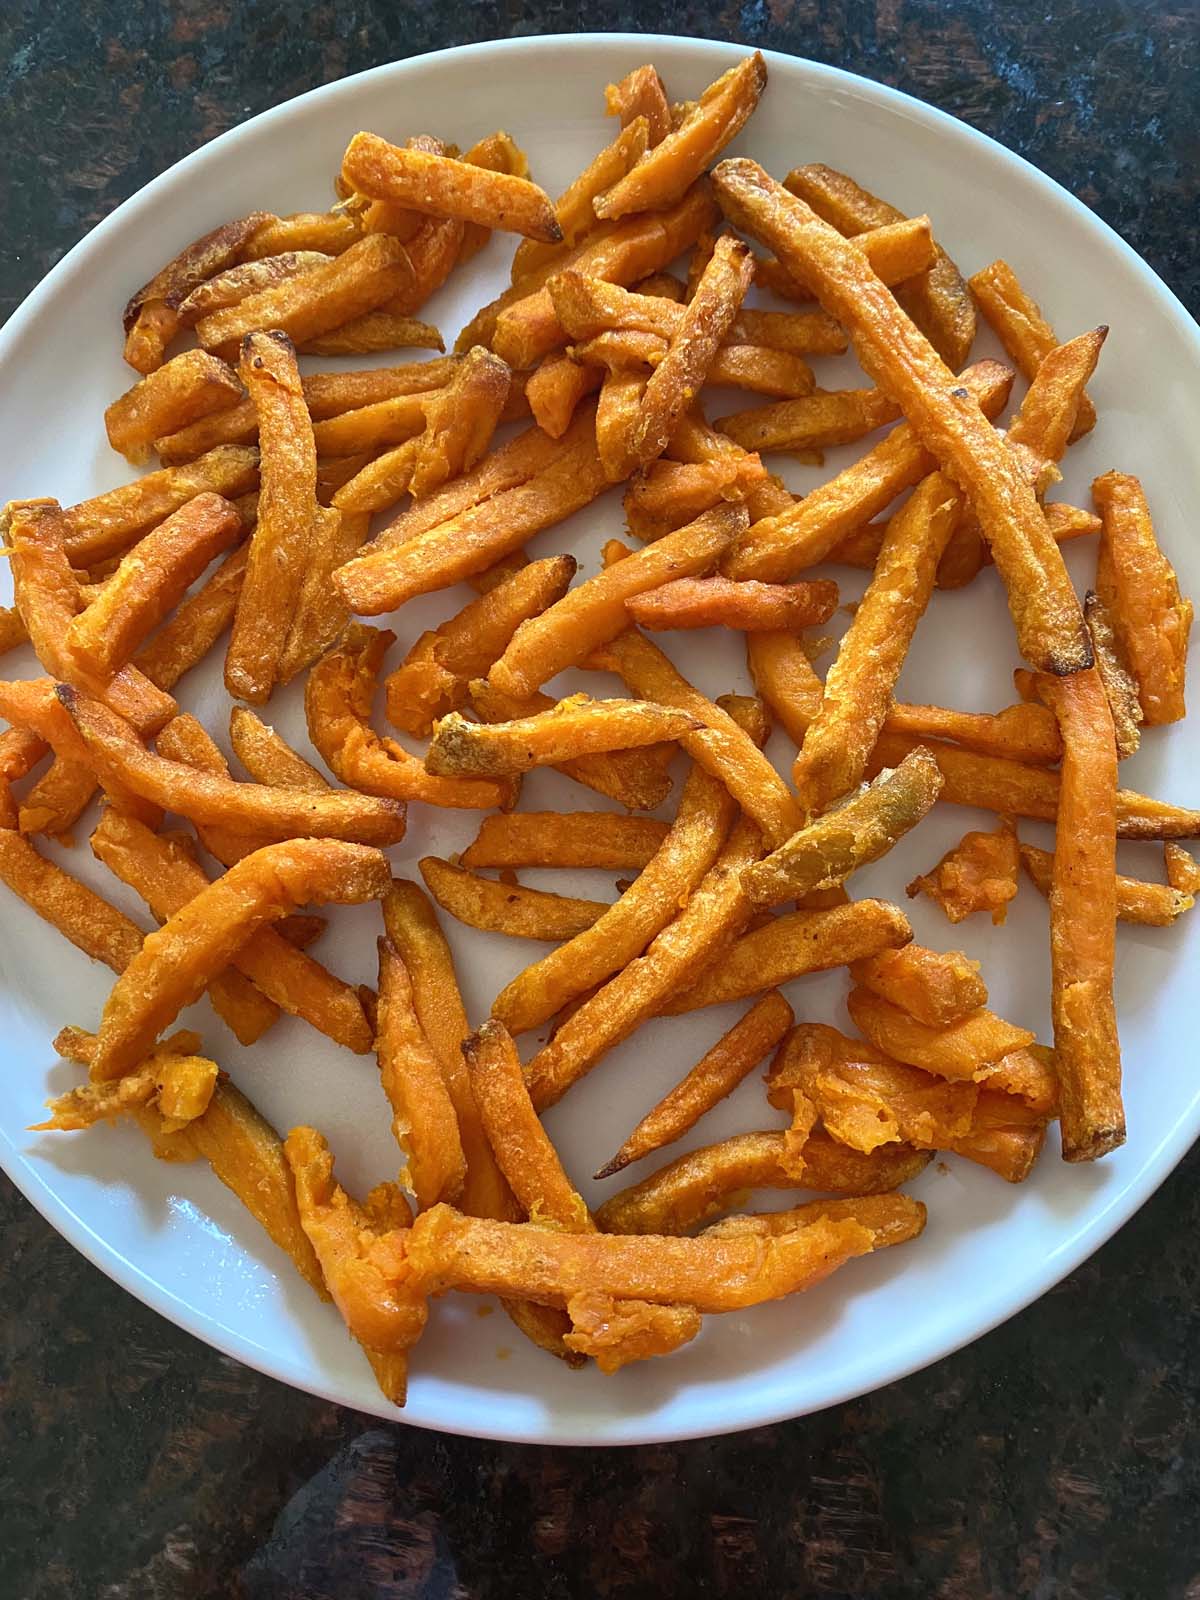 Air Fryer Sweet Potato Fries In 12 Minutes [Step By Step Recipe]